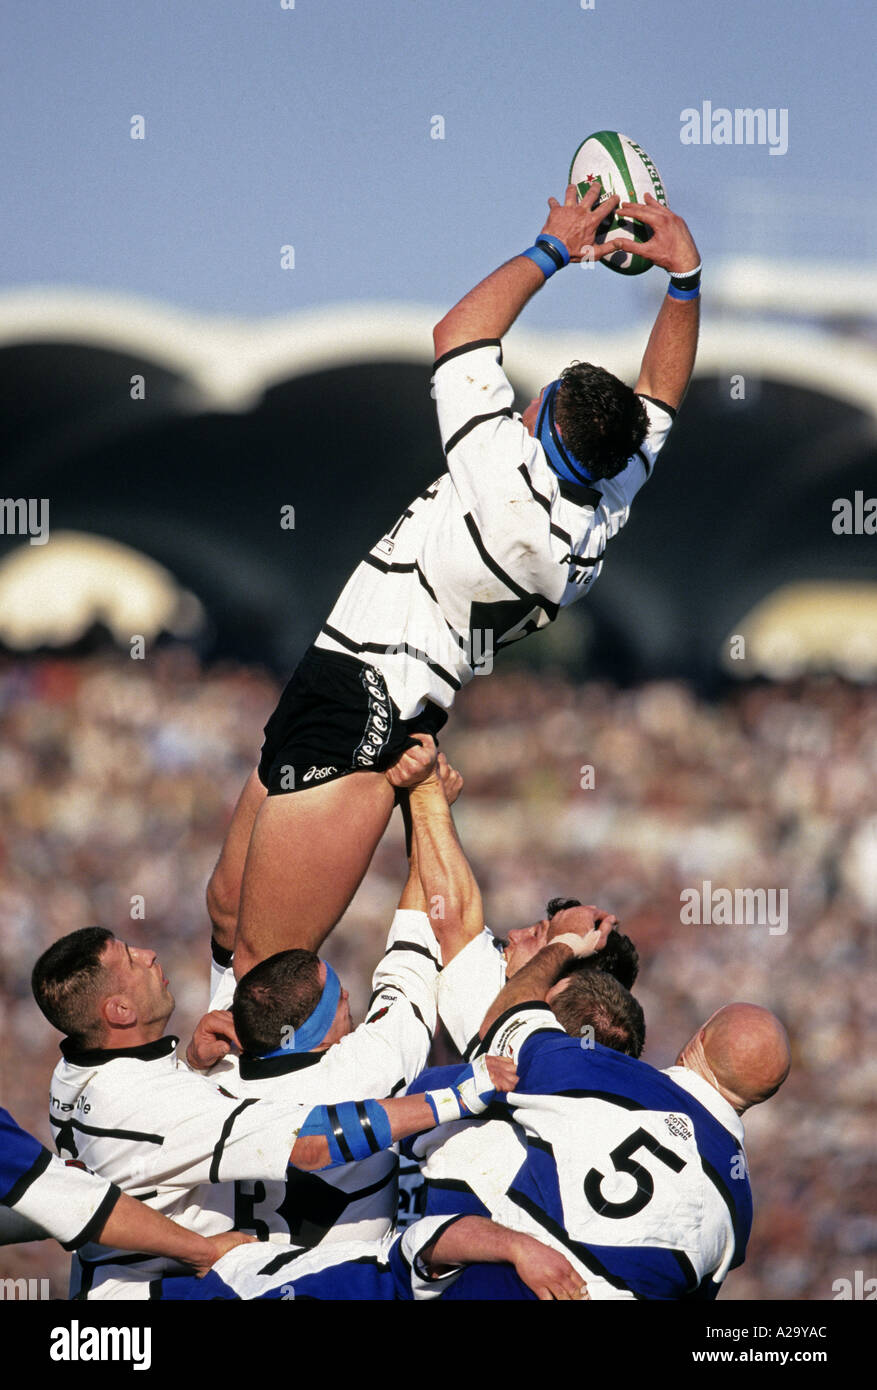 A player is lifted high by his team mates to claim the ball in a line out during a rugby union game Stock Photo